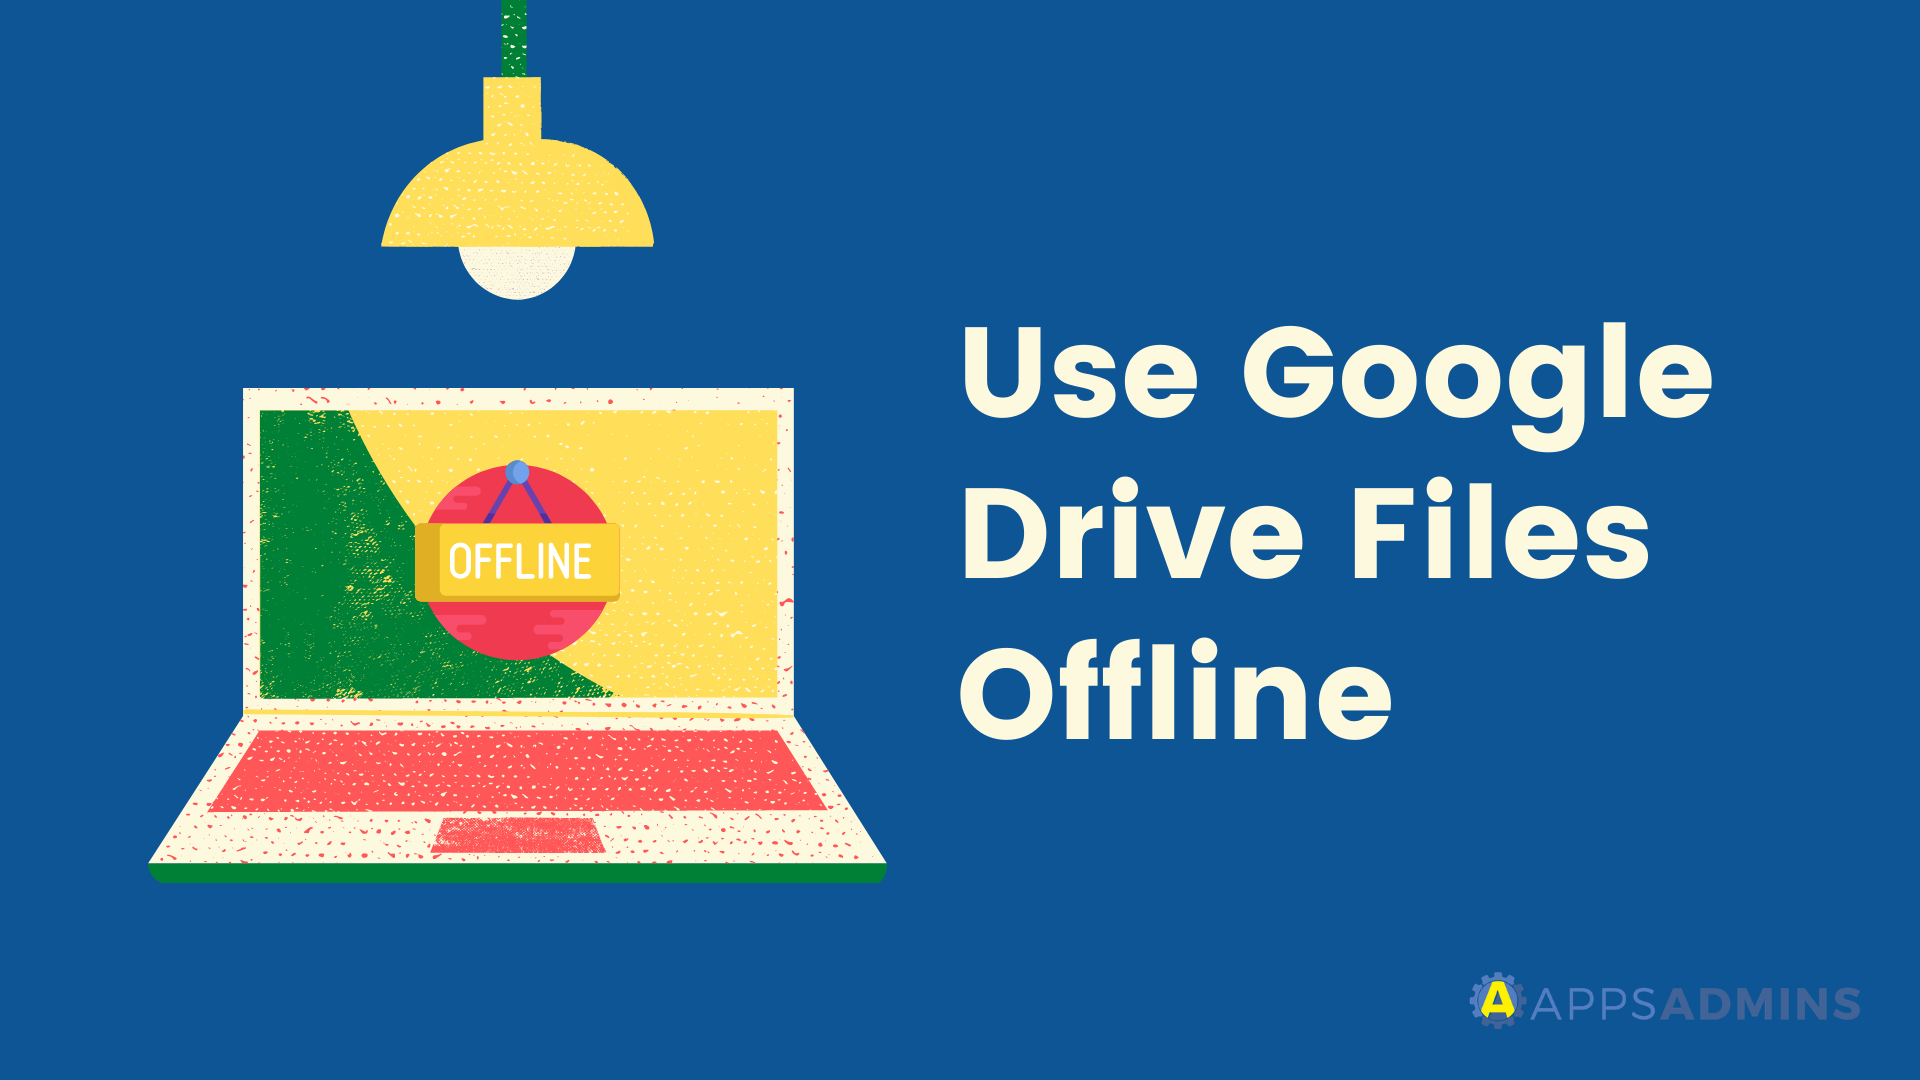 How to use Google Drive Files Offline